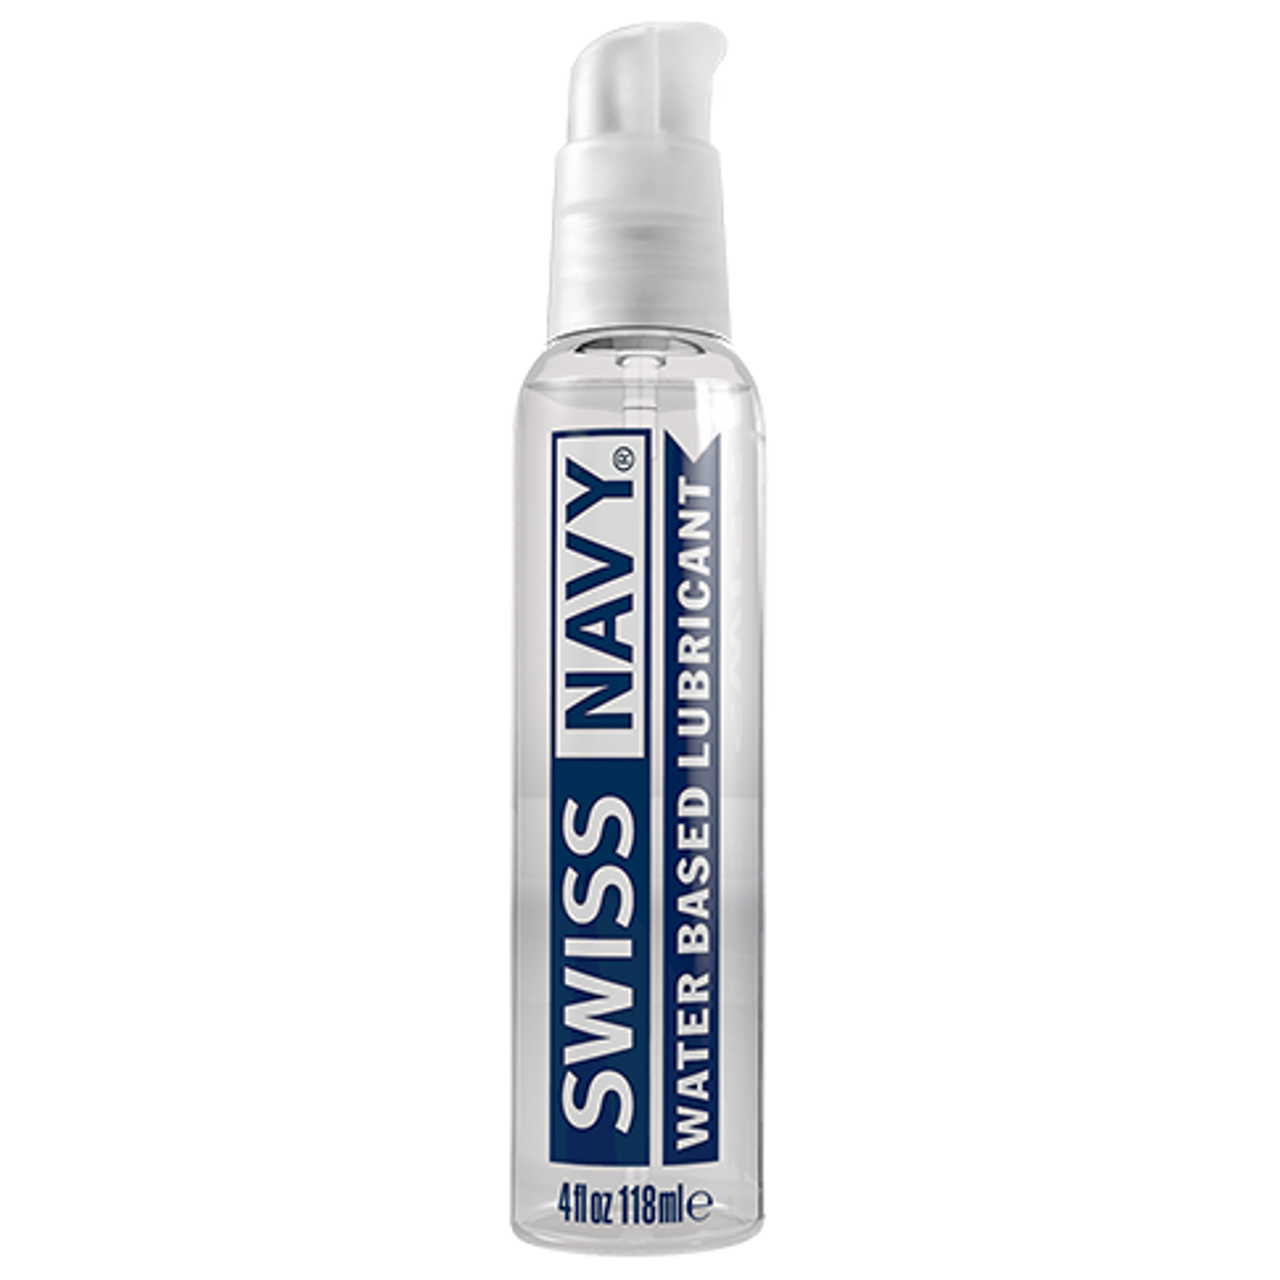 Best Water Based Personal Lubricant Swiss Navy